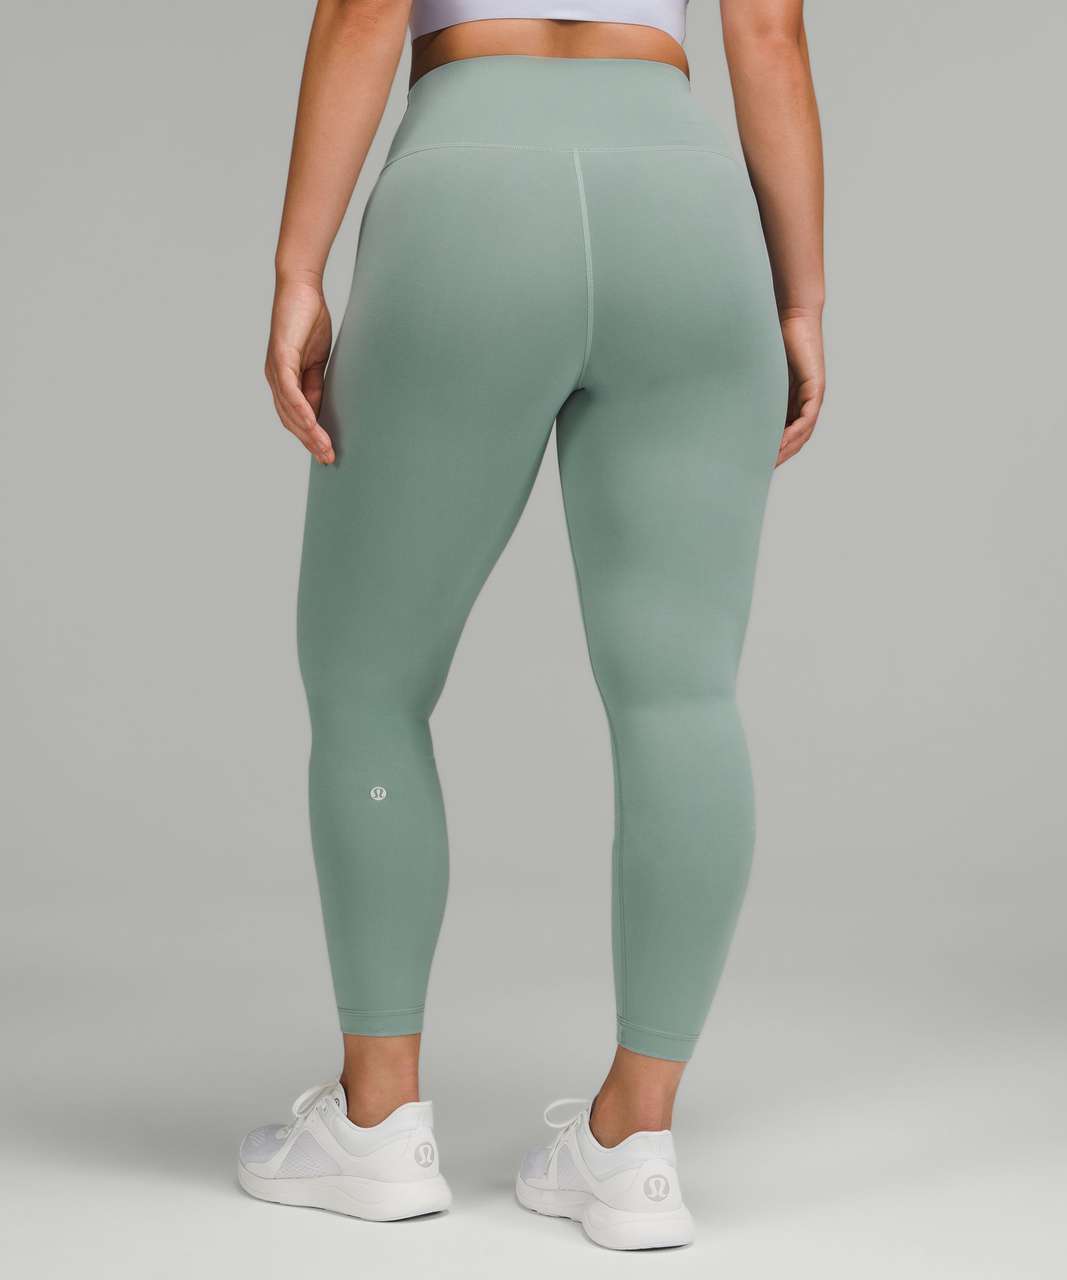 Like a Cloud Bra (2) in Hazy Jade paired with Wunder Train 25” (4) in Misty  Glade! : r/lululemon